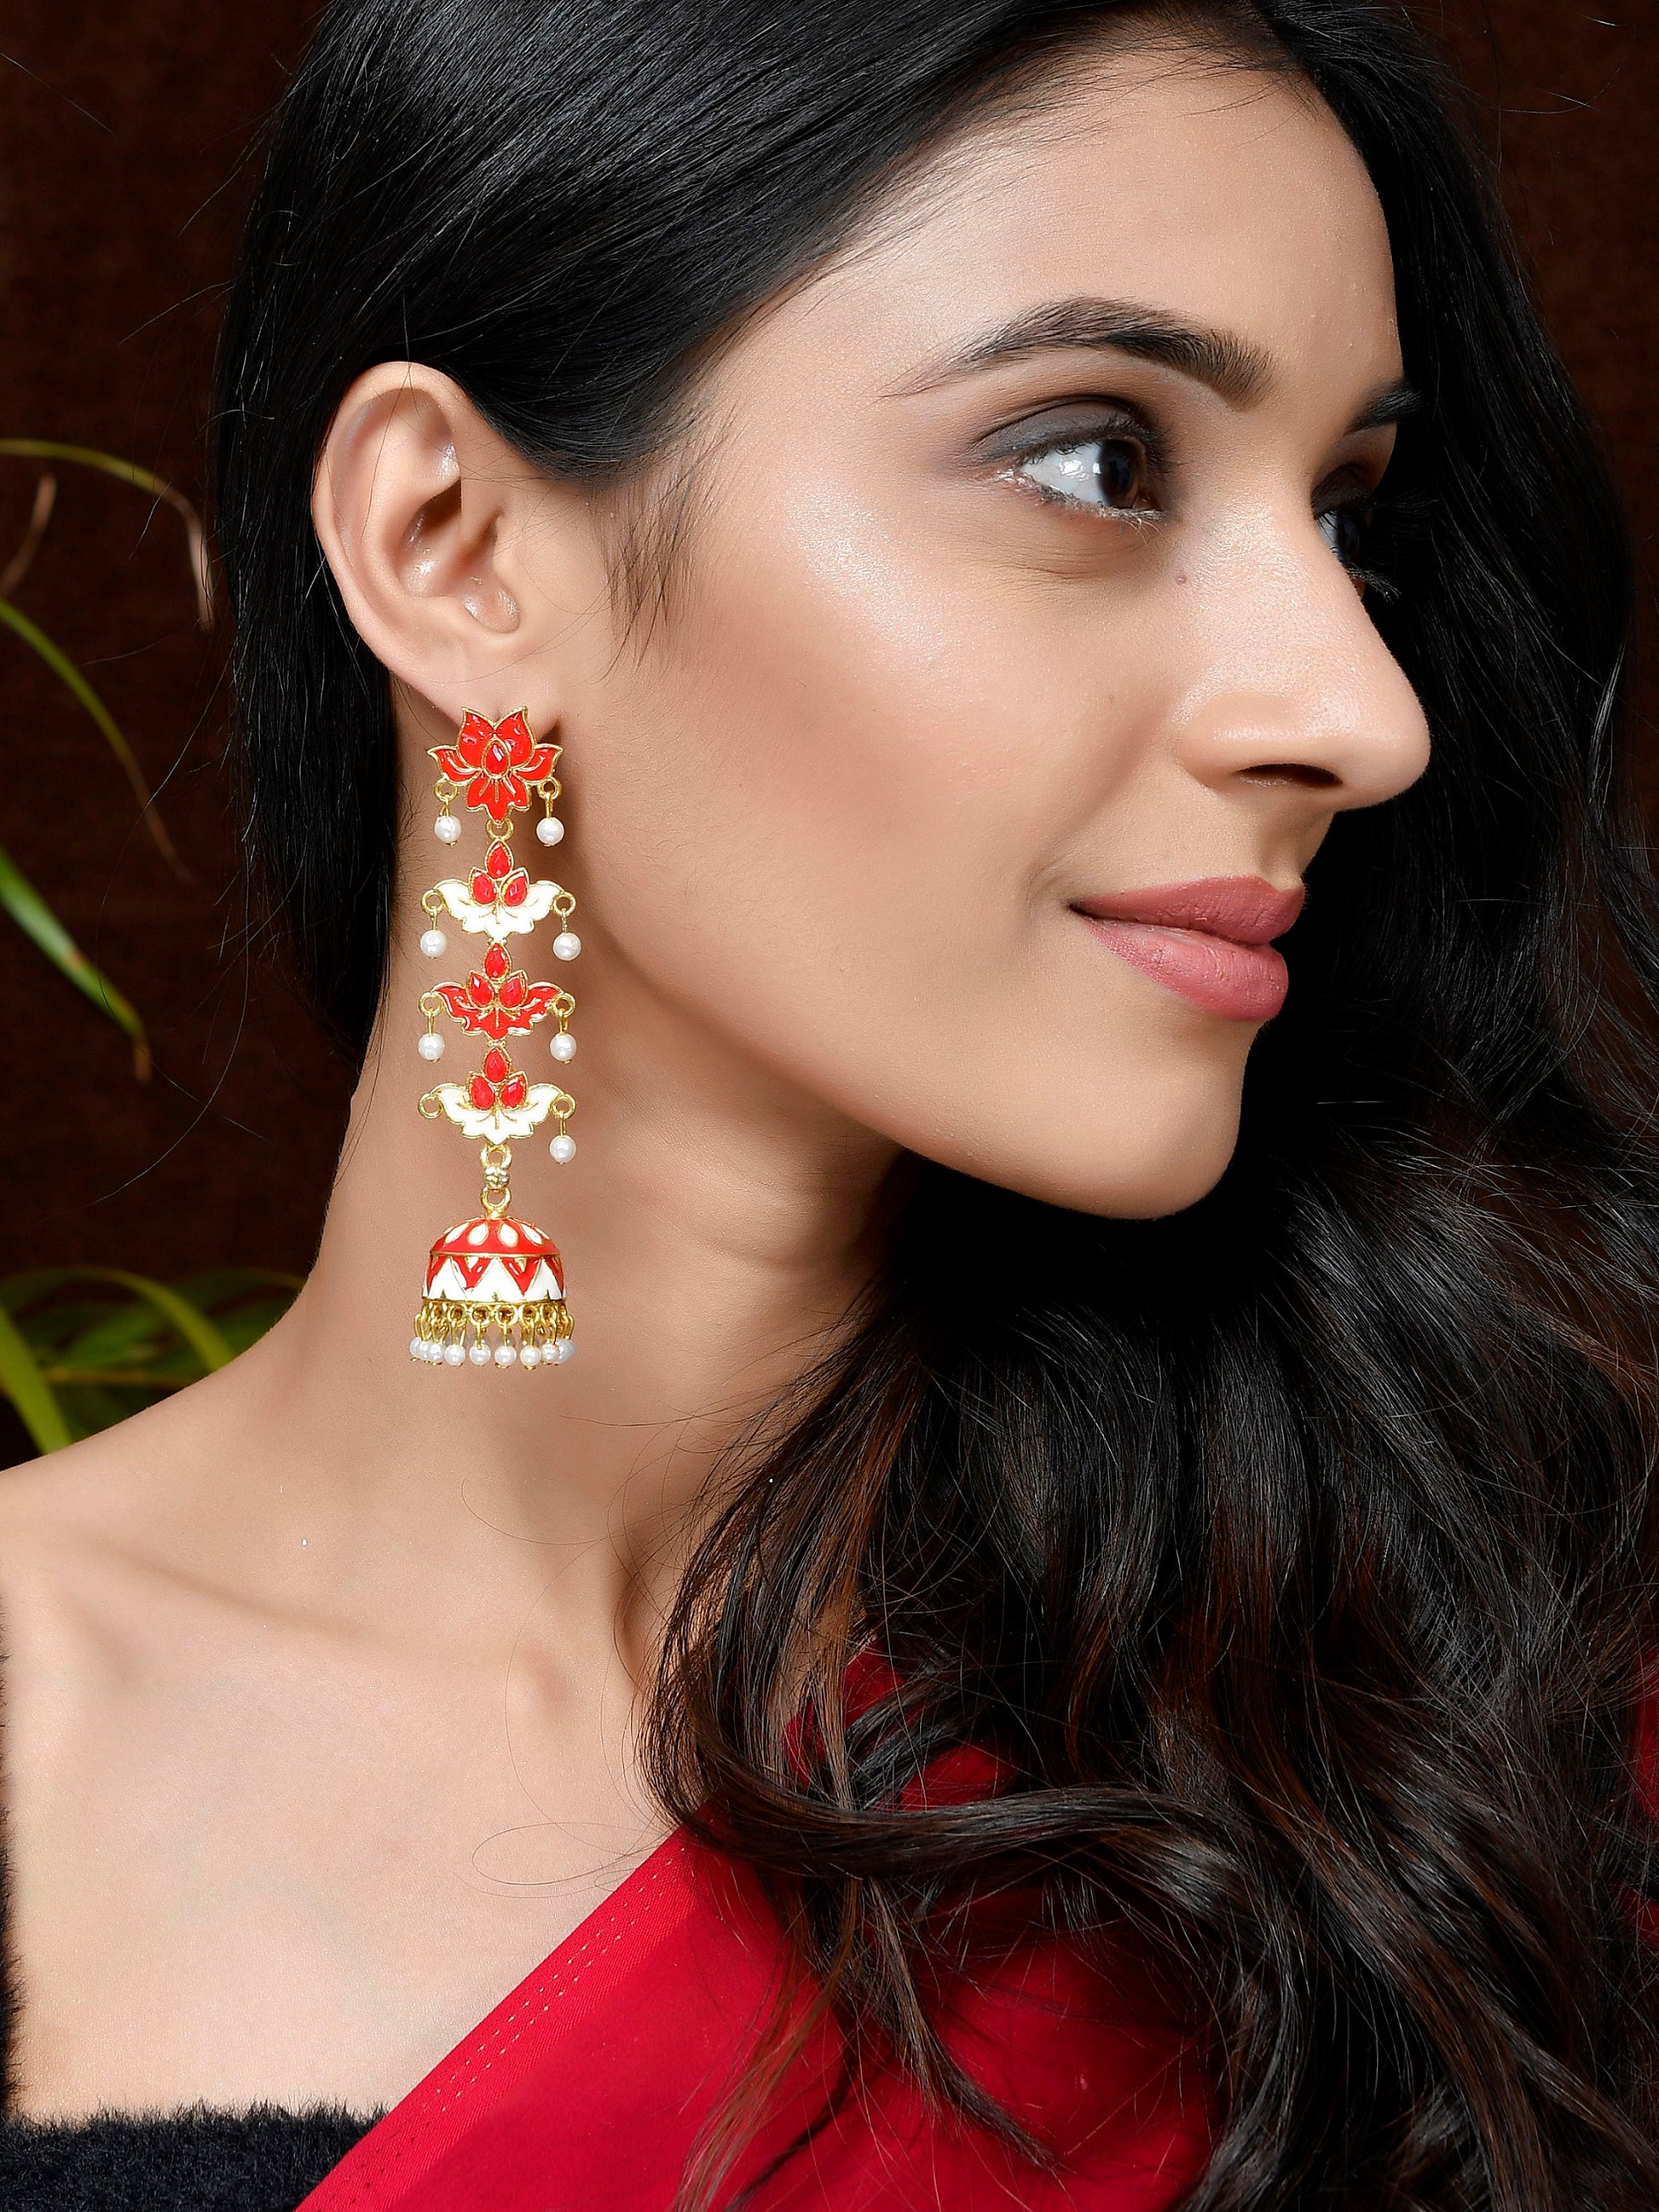 Gold Plated Red Dome Shaped Handcrafted Jhumkas